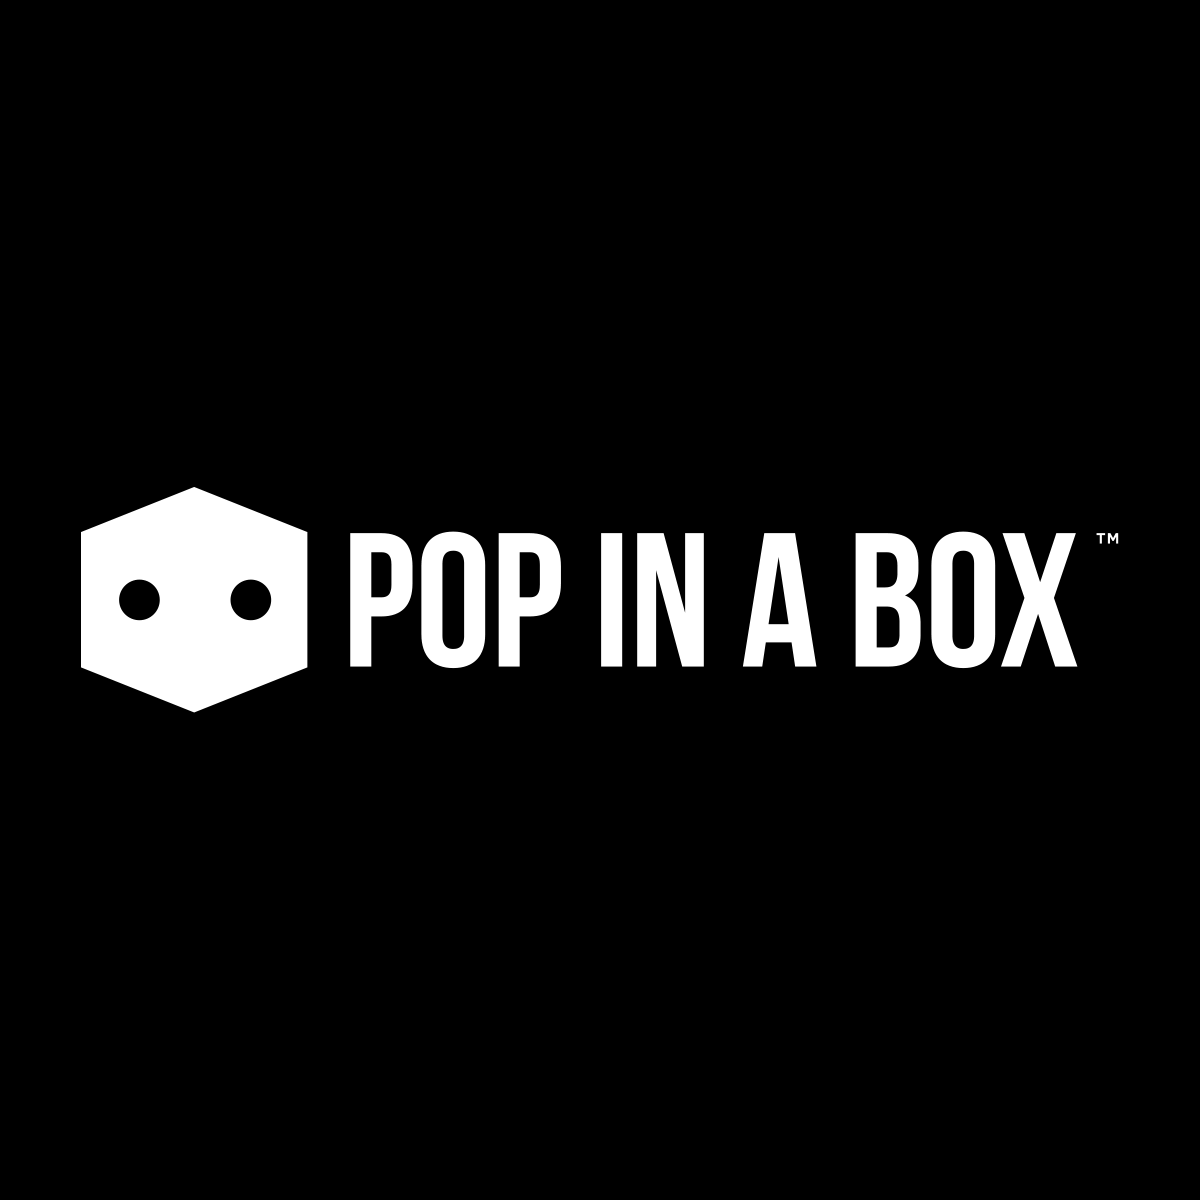 10% Off With Pop In A Box UK Voucher